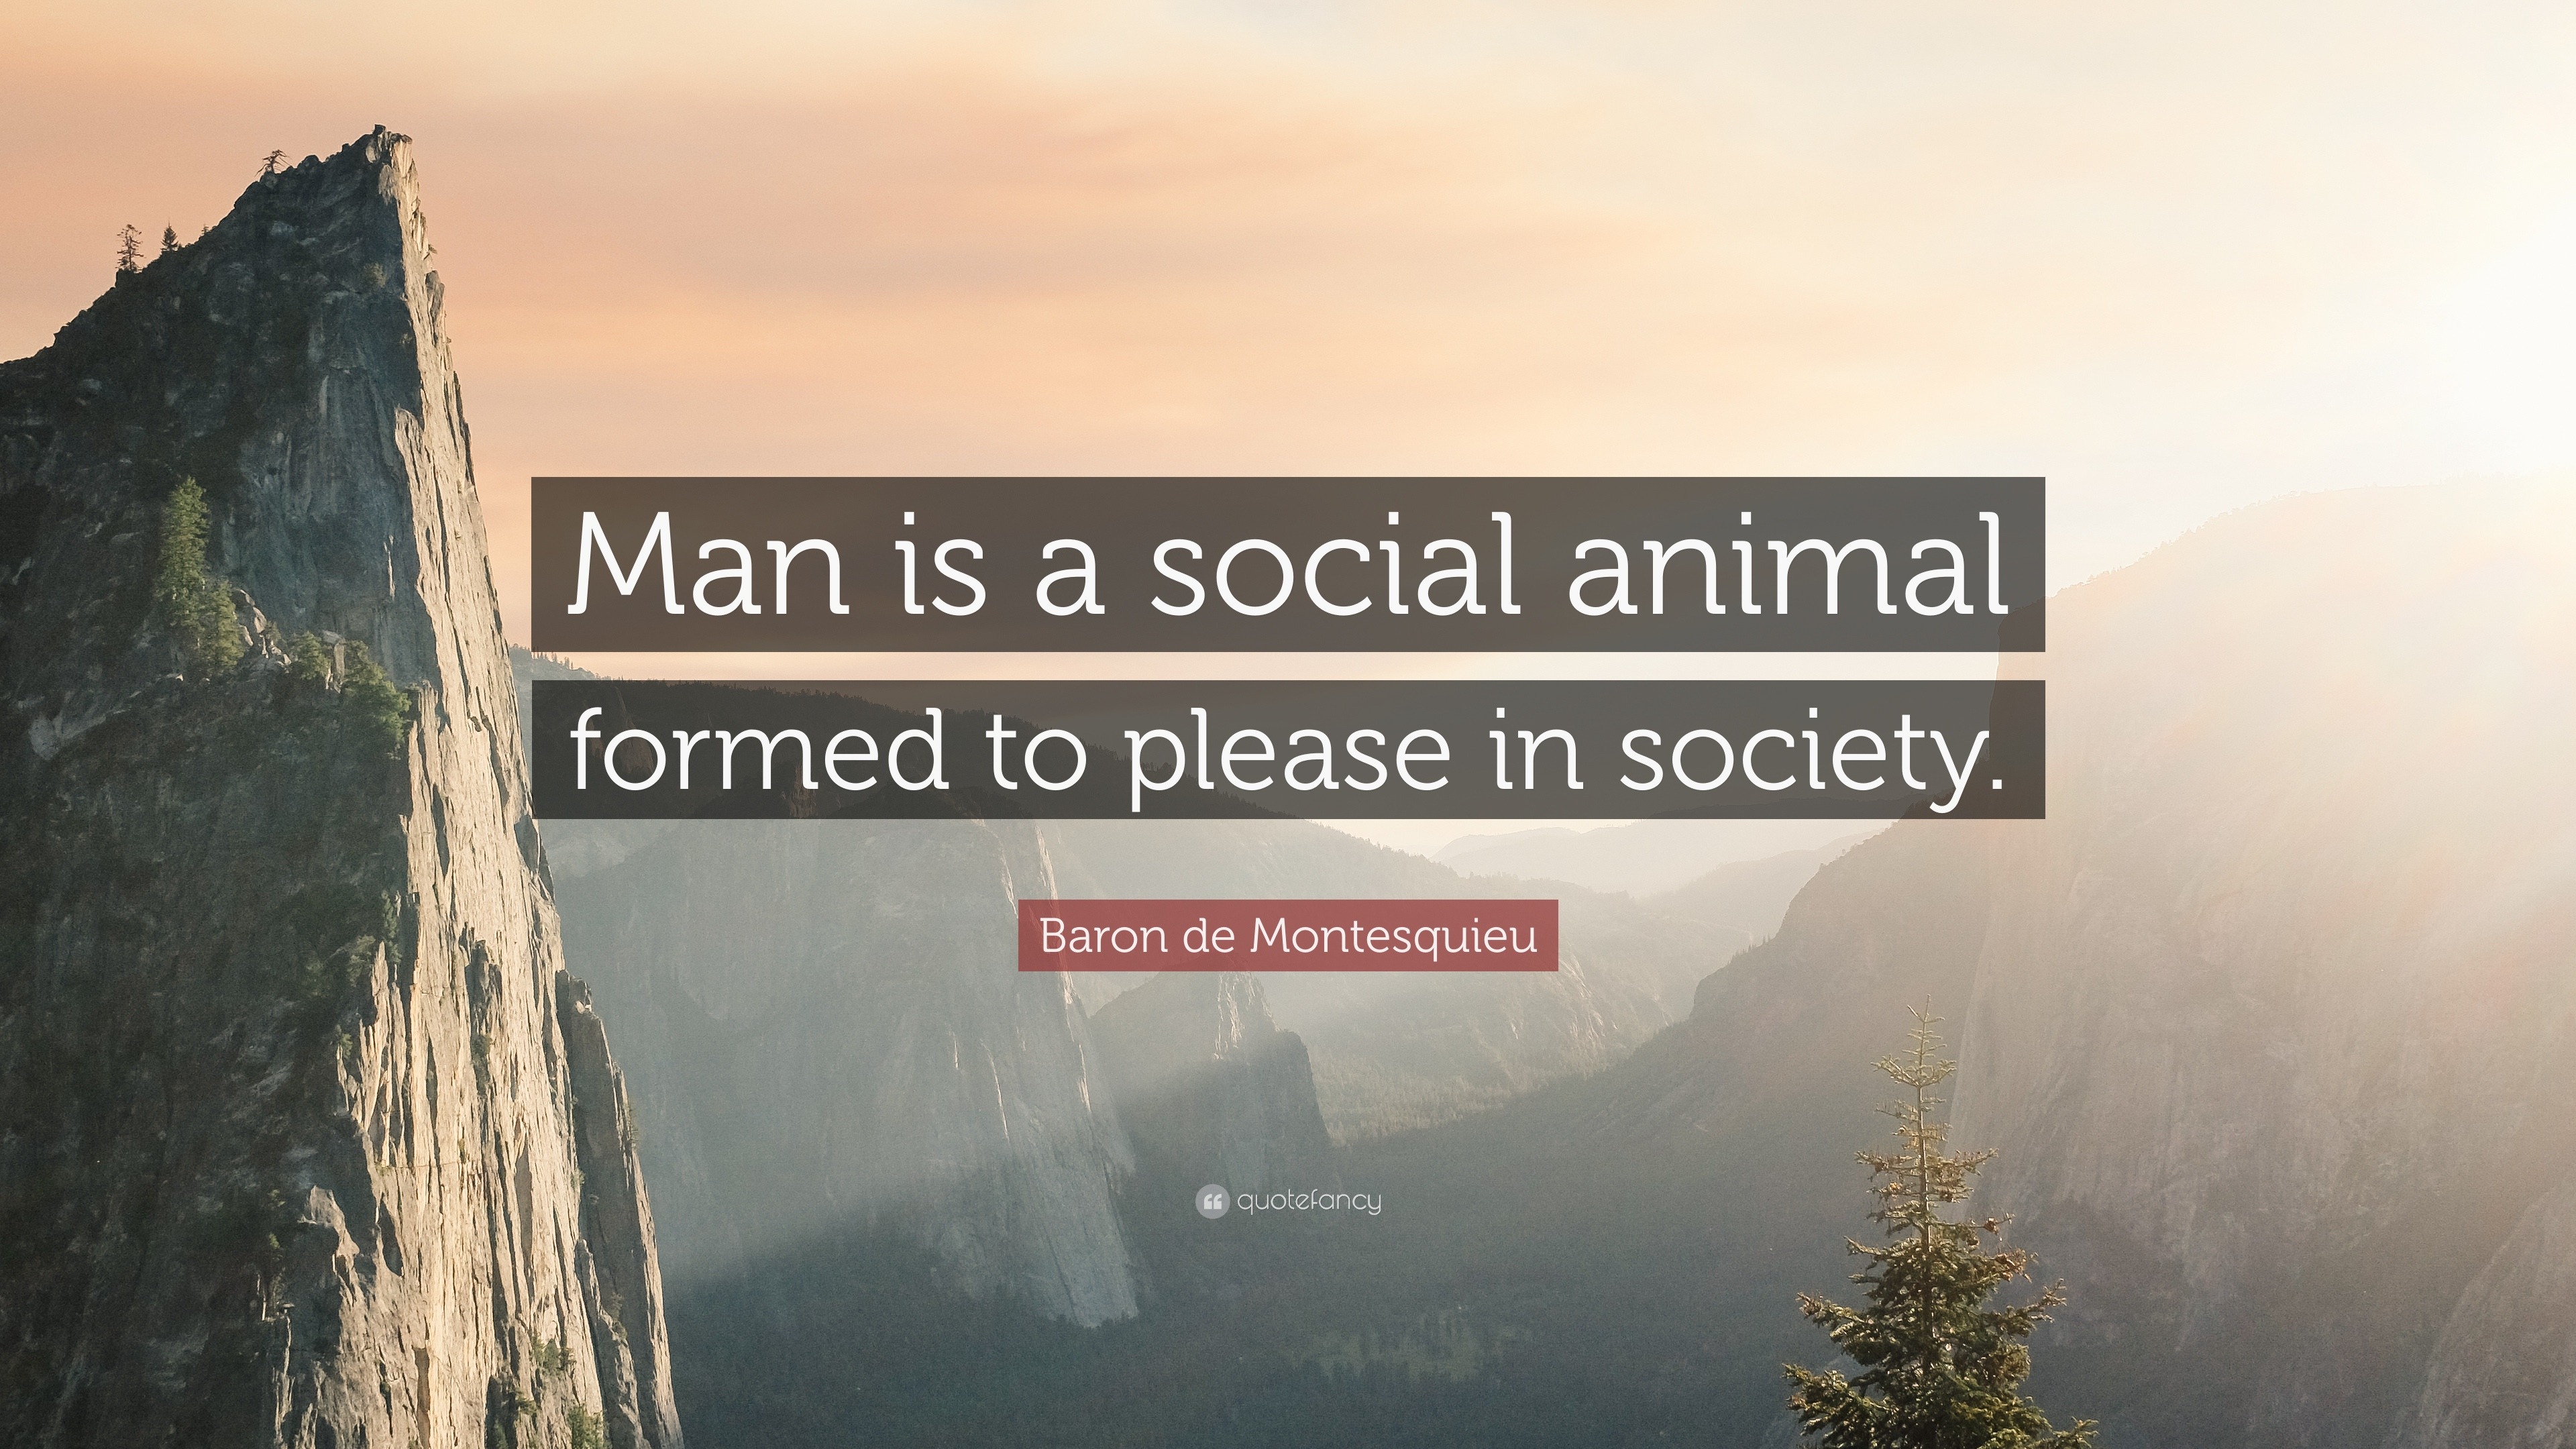 Baron de Montesquieu Quote: “Man is a social animal formed to please in  society.”